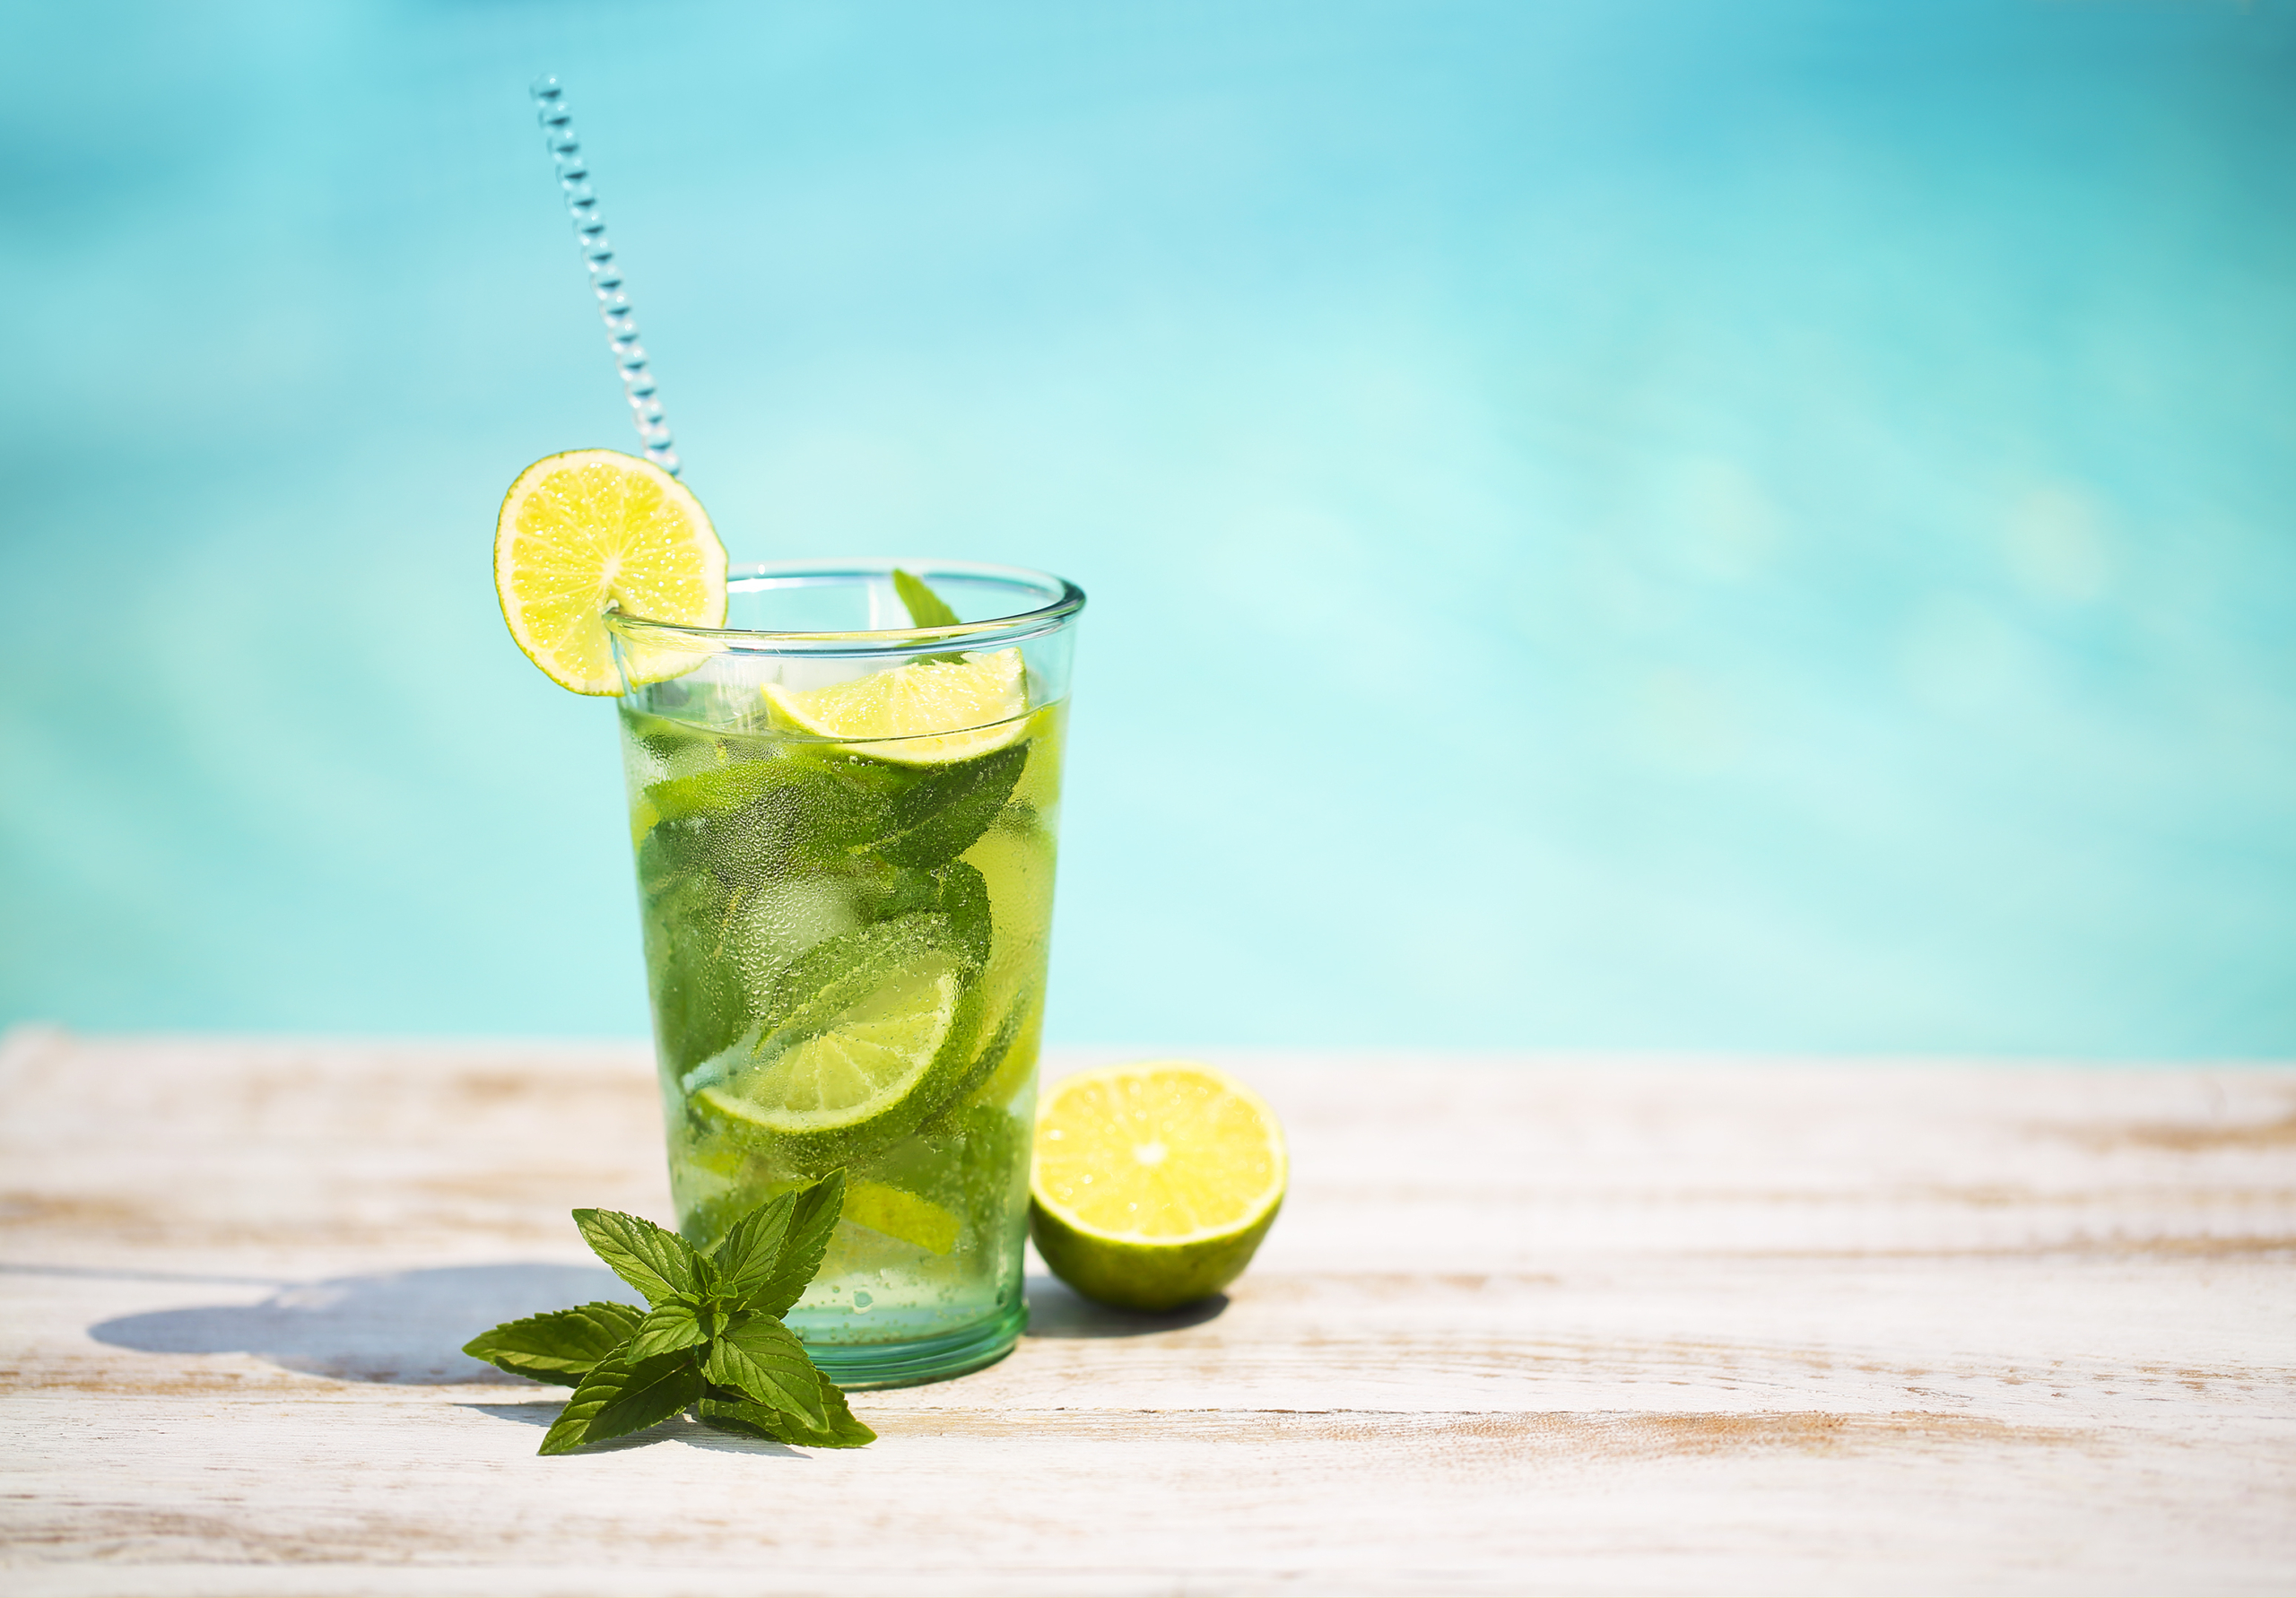 Mojito as a summer cocktail